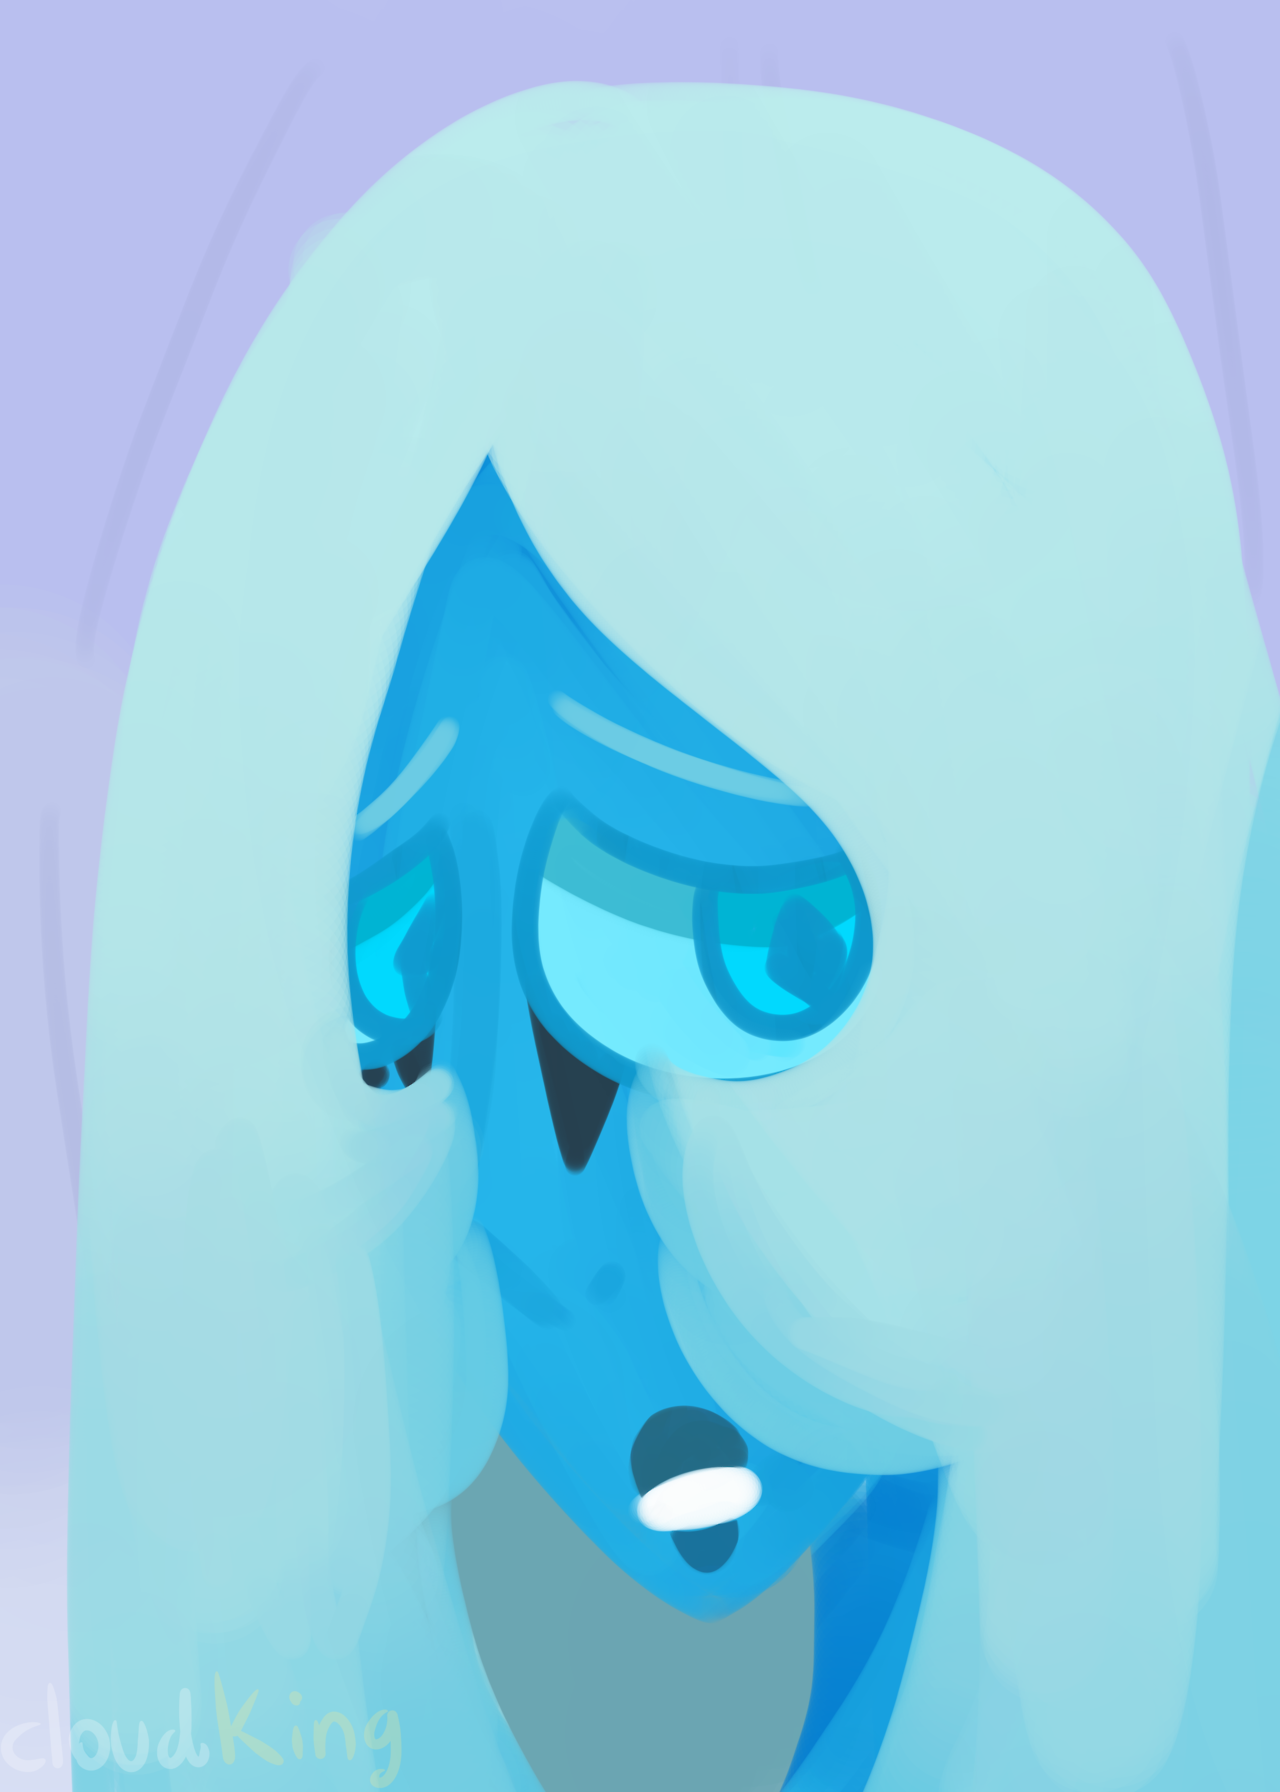 Decided to paint Blue Diamond as a warmup,